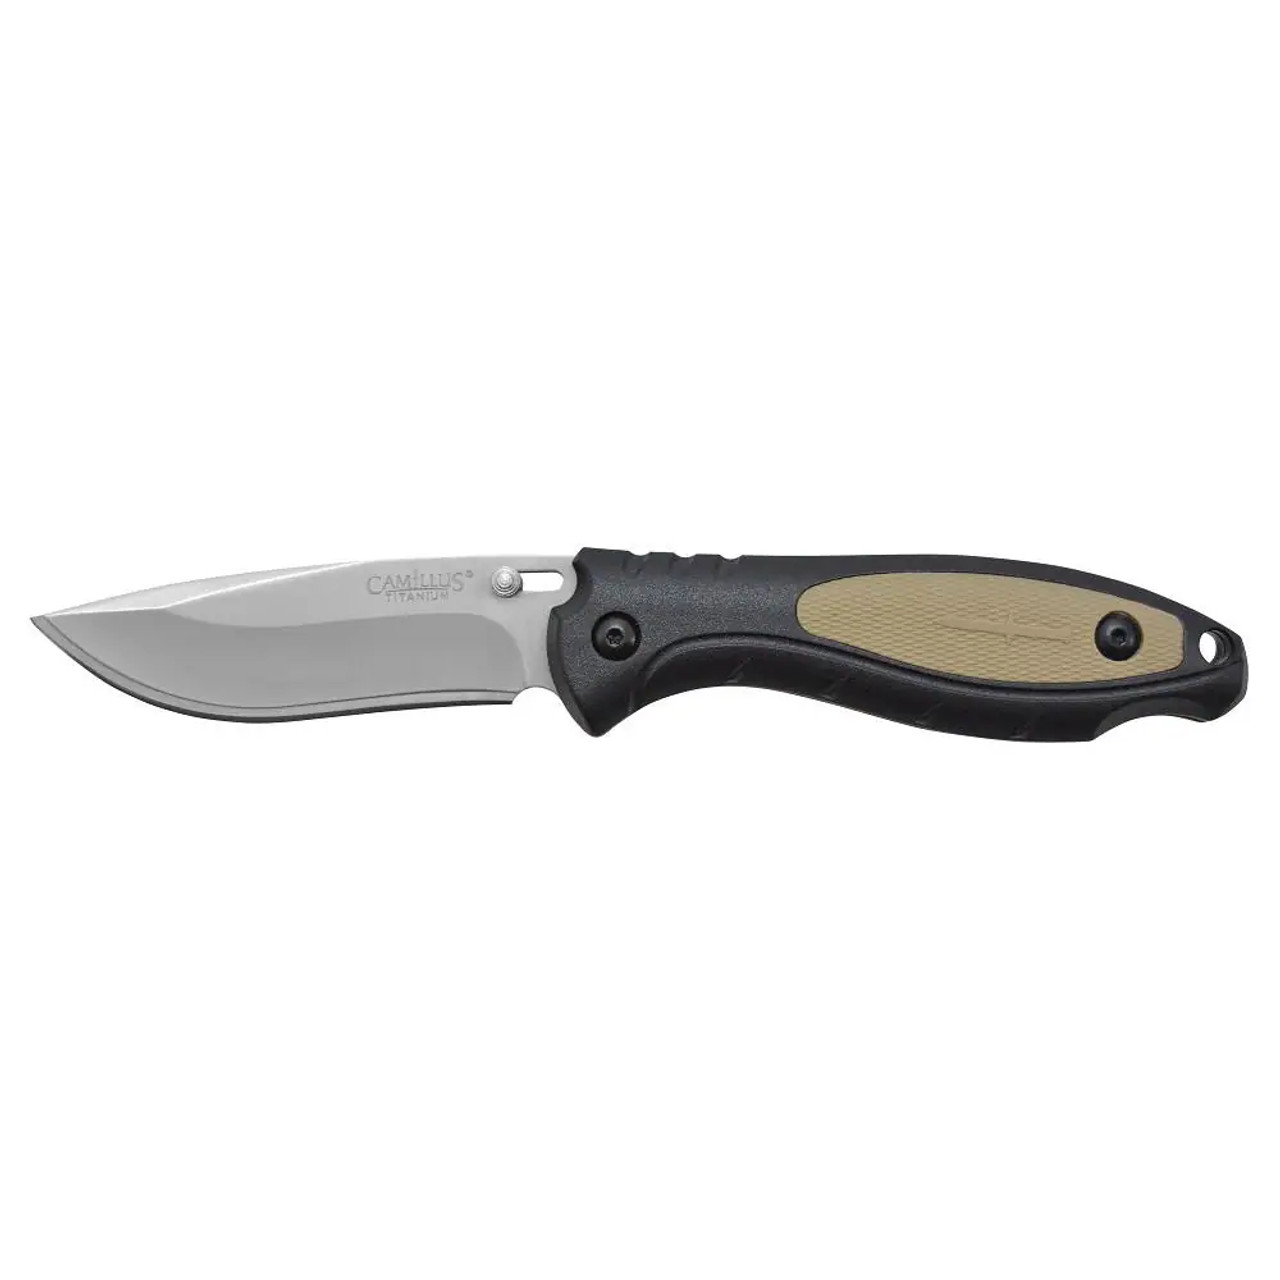 Camillus Tiger Sharp Titanium Bonded 8.0" Fixed Blade Knife, 3.35" Blade, 1 Straight & 1 Serrated Replacement Blade